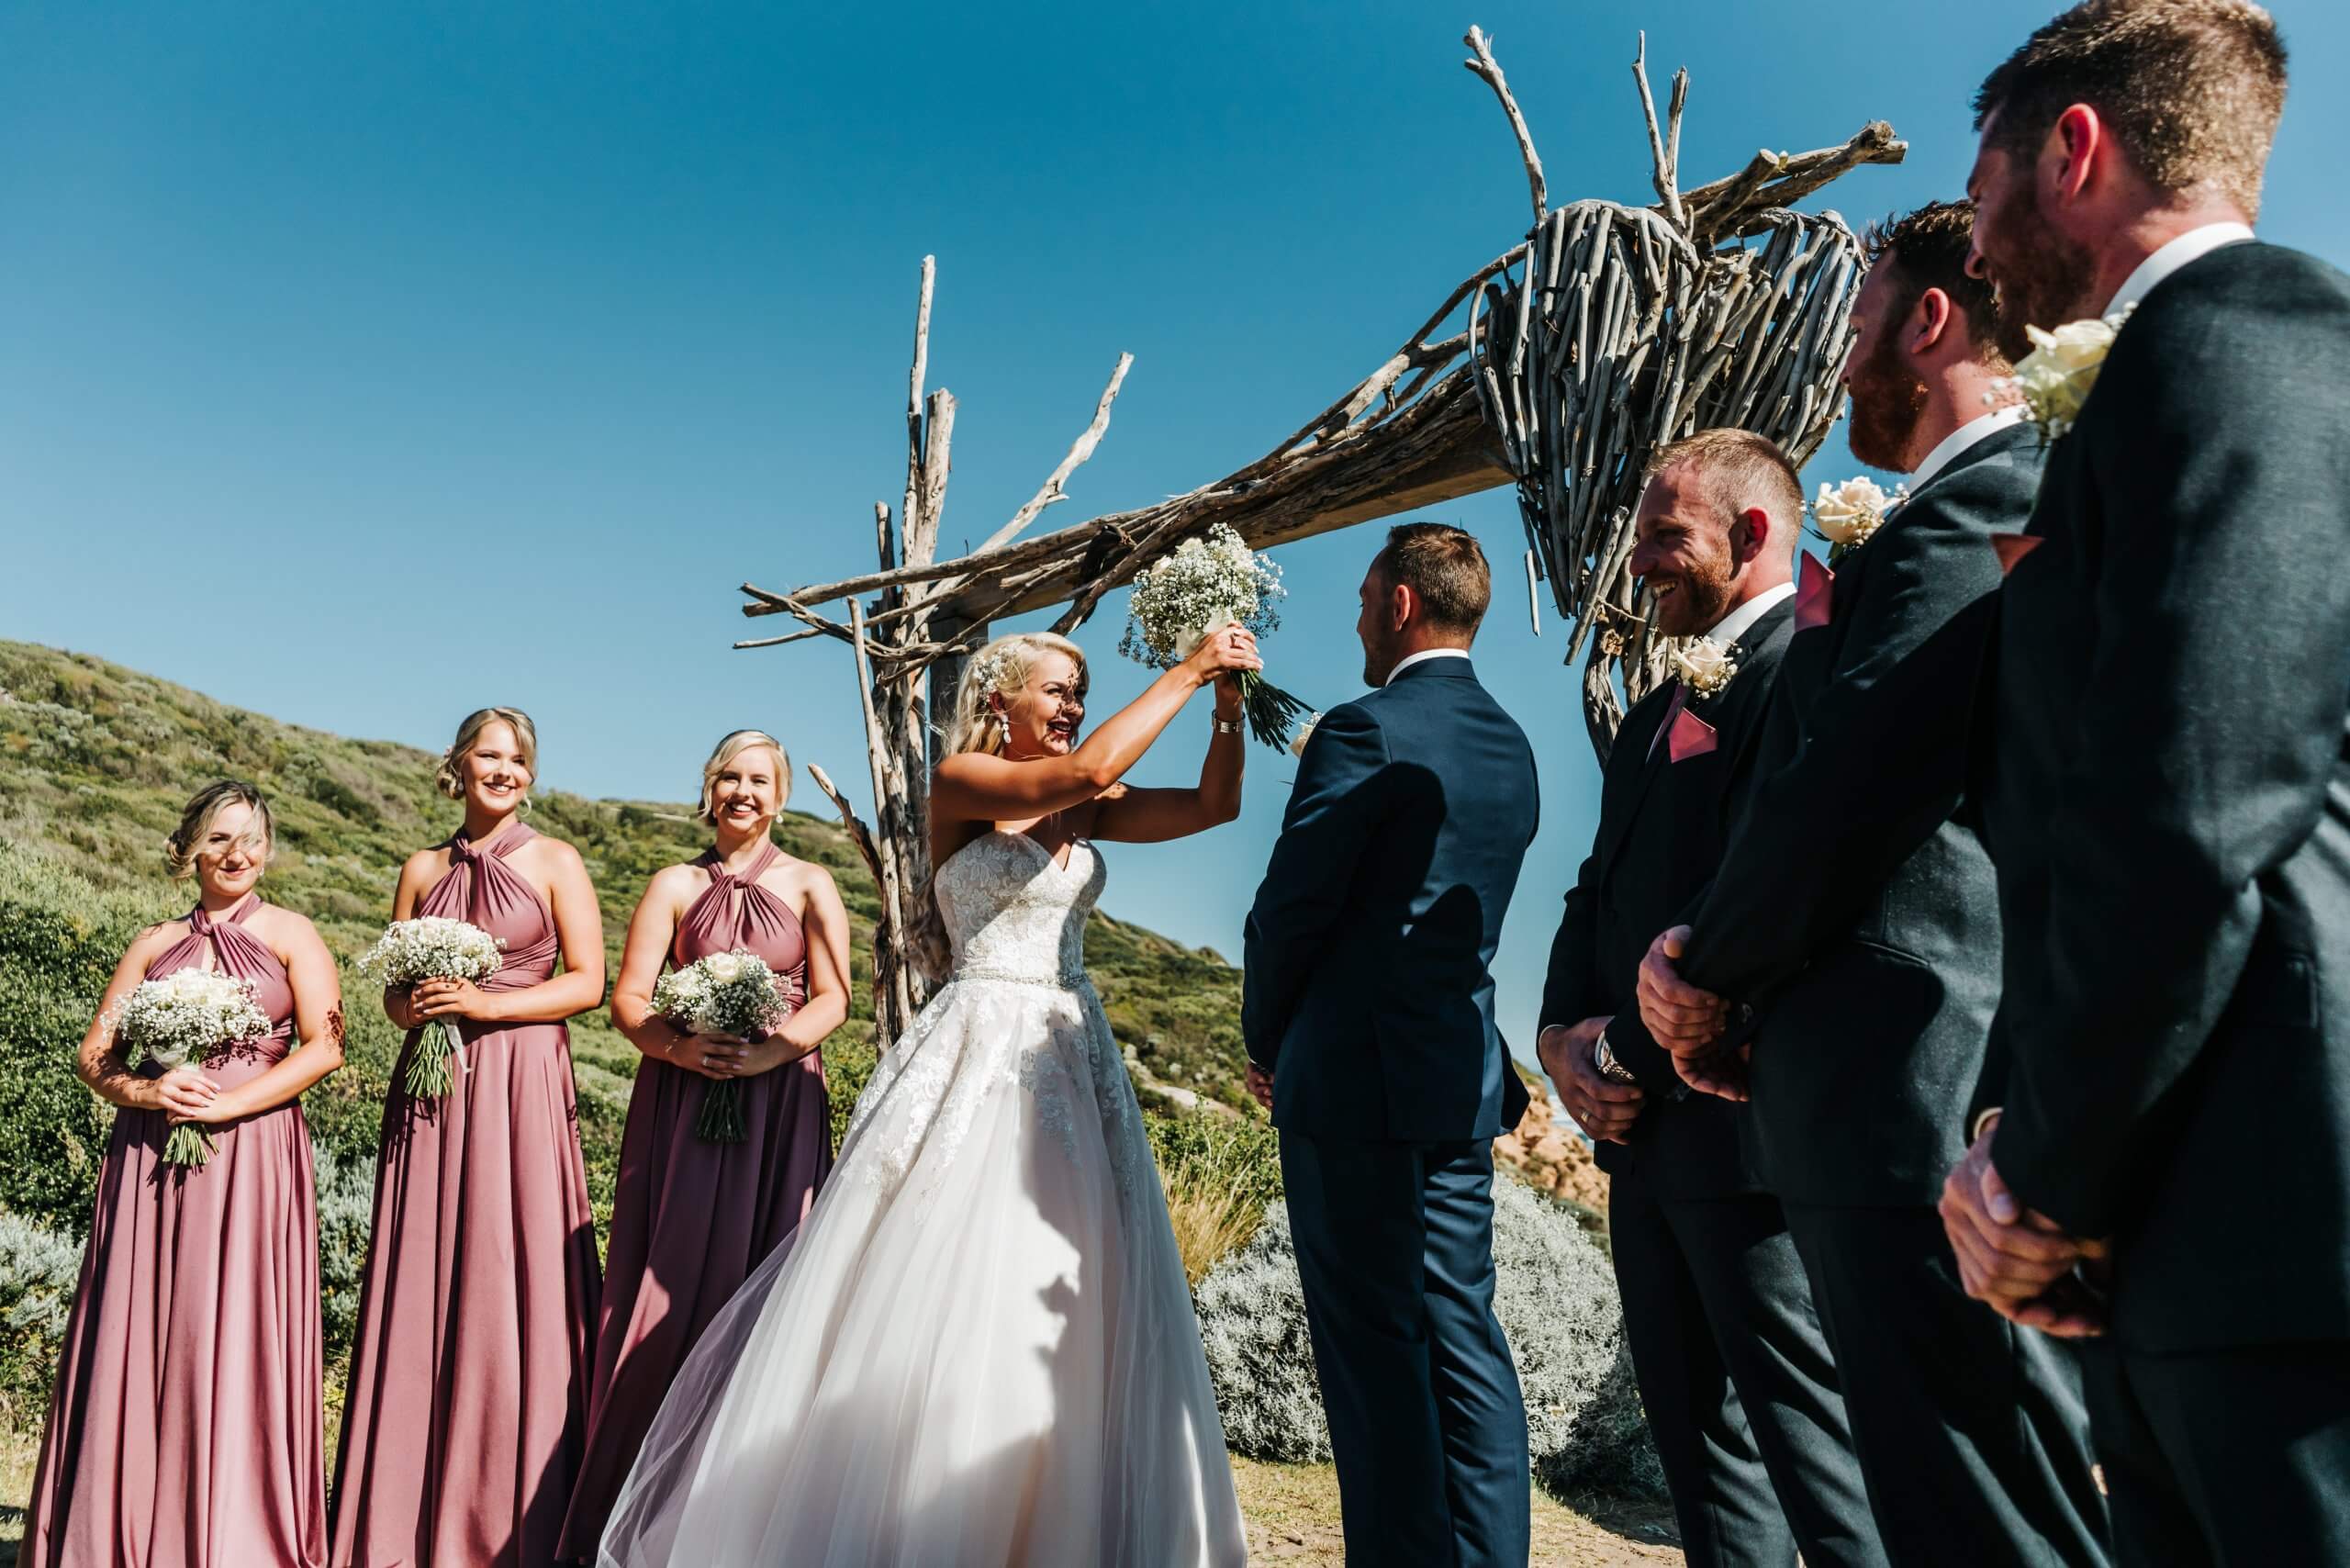 The bride playfully shields her face from the sunlight during her beach wedding ceremony where she is standing under the clear blue sky and wedding arch, while being surrounded by her bridesmaids, groomsmen, and groom.